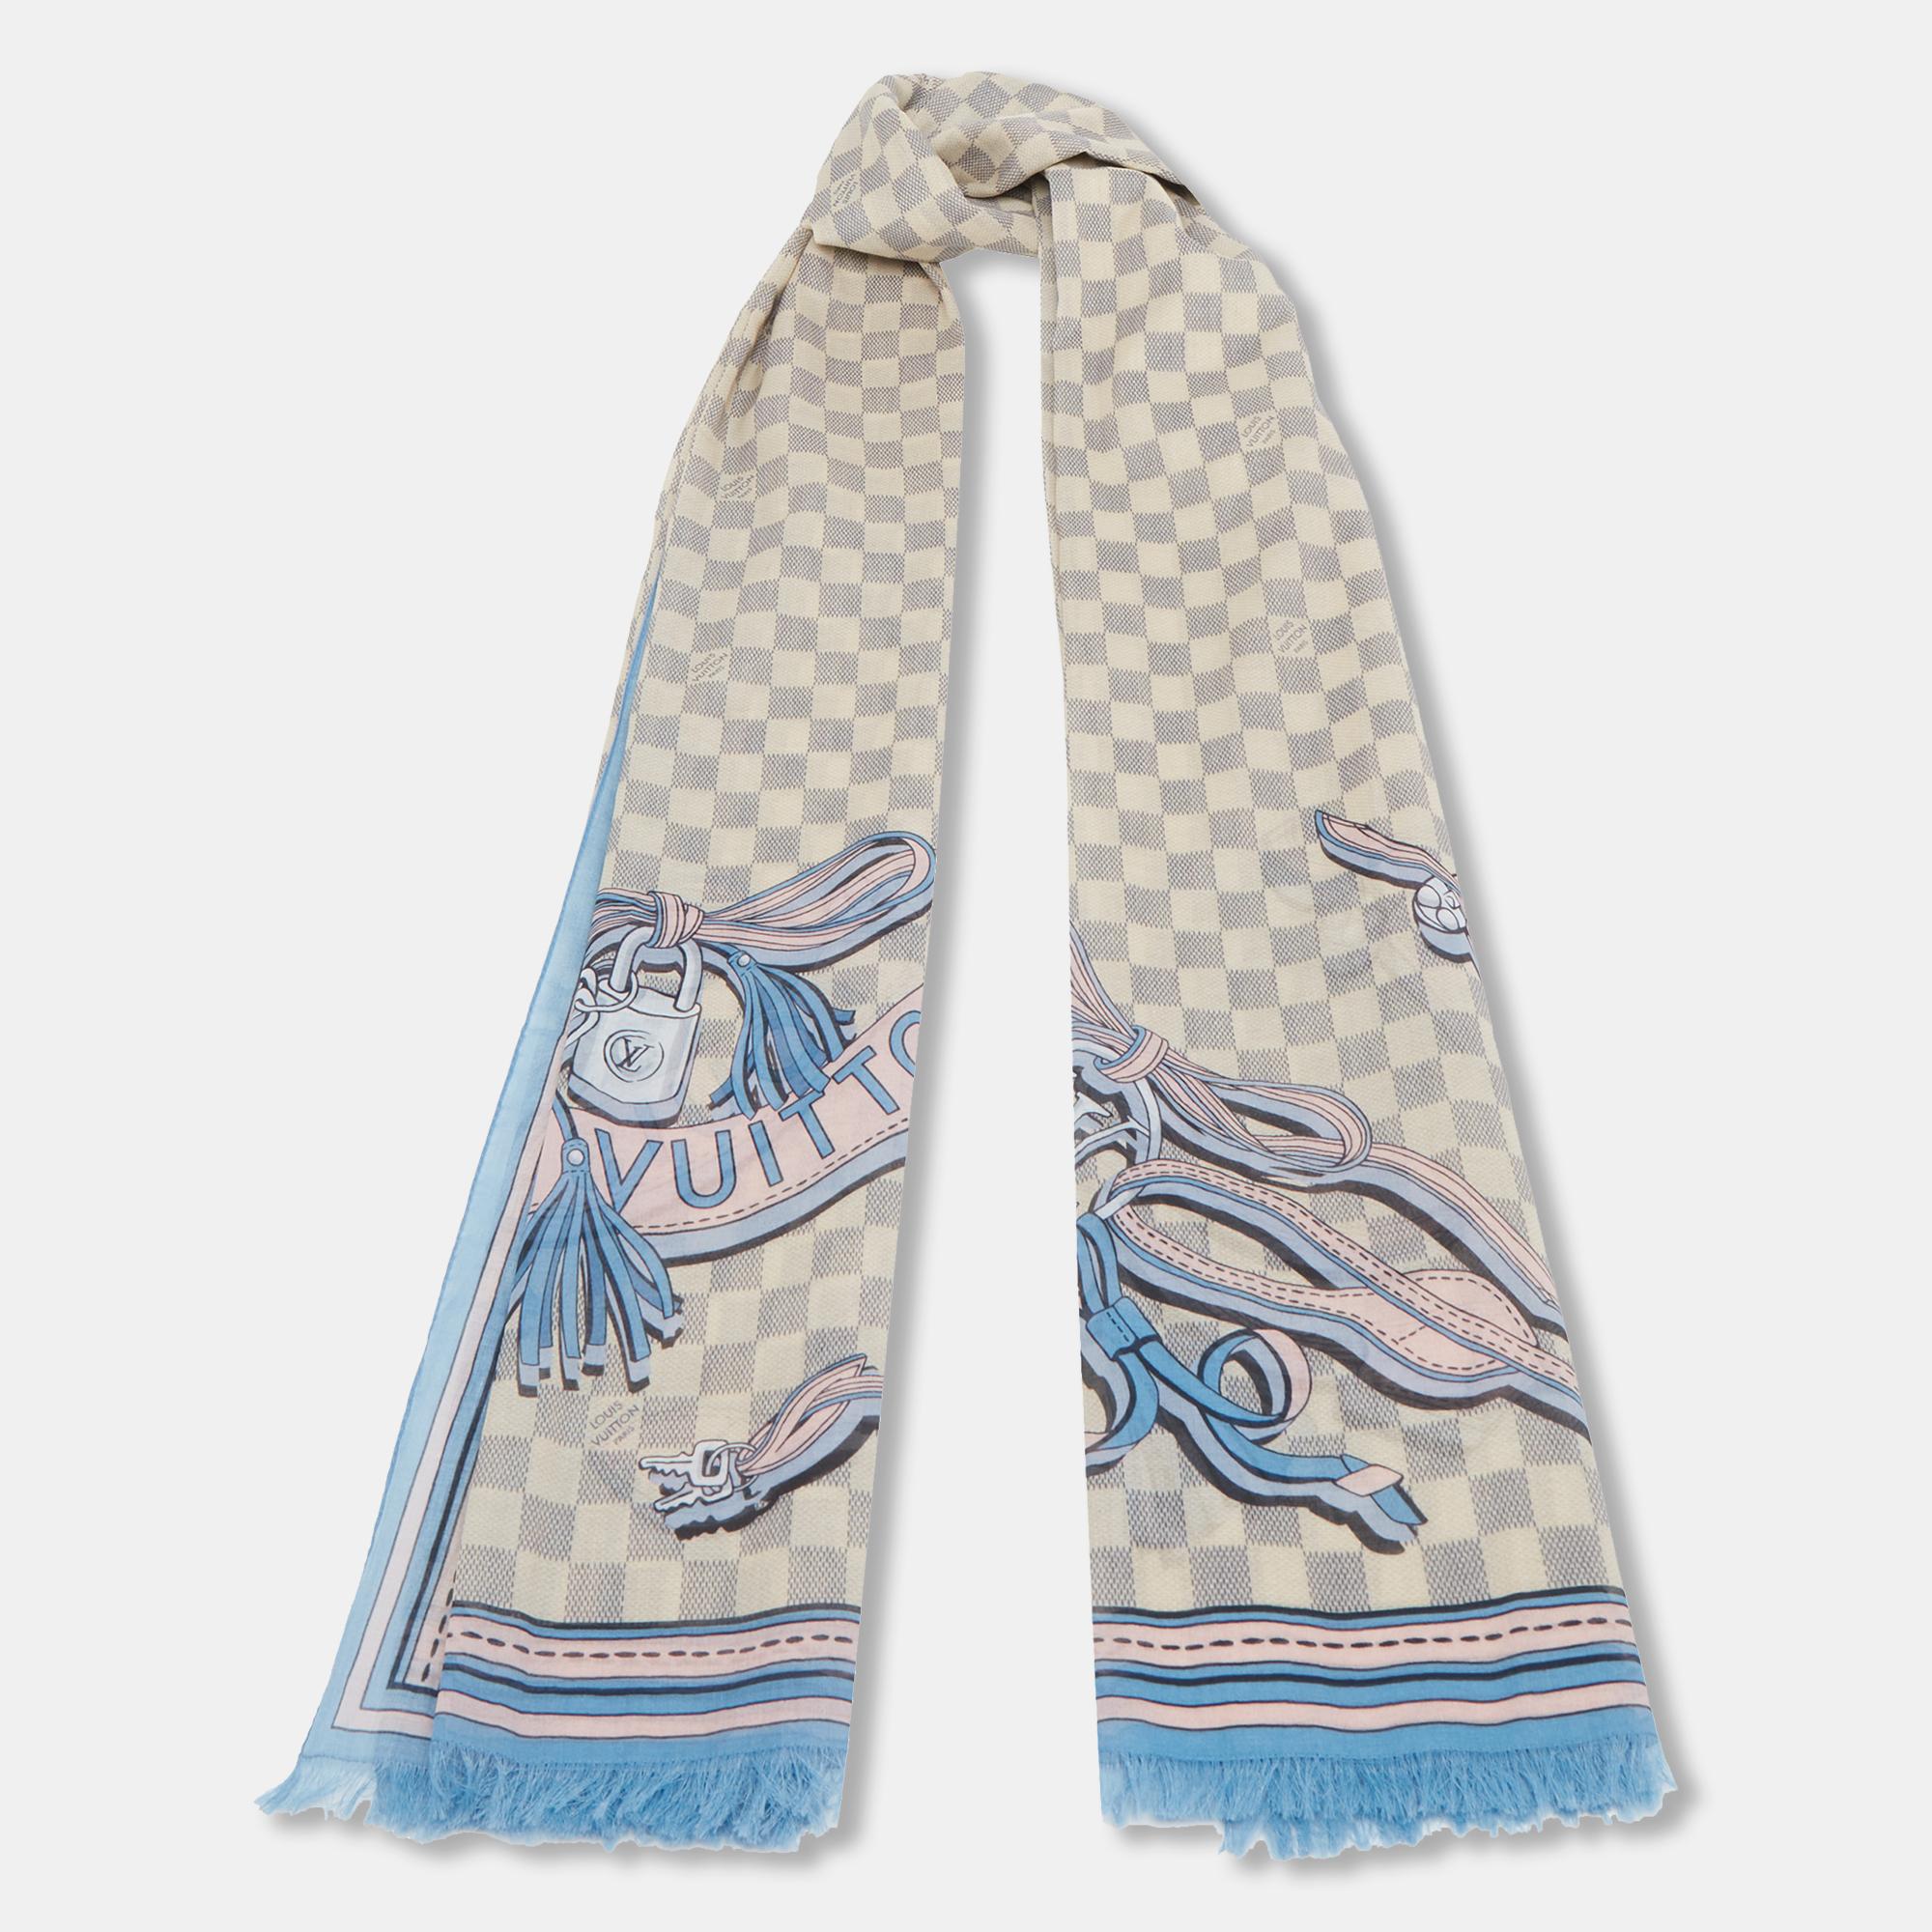 Classy and luxurious are some words that come to our minds when we think of Louis Vuitton. The label brings you this scarf made from cotton in a blue and beige shade and has the Azur pattern as well as LV strap prints all over.

